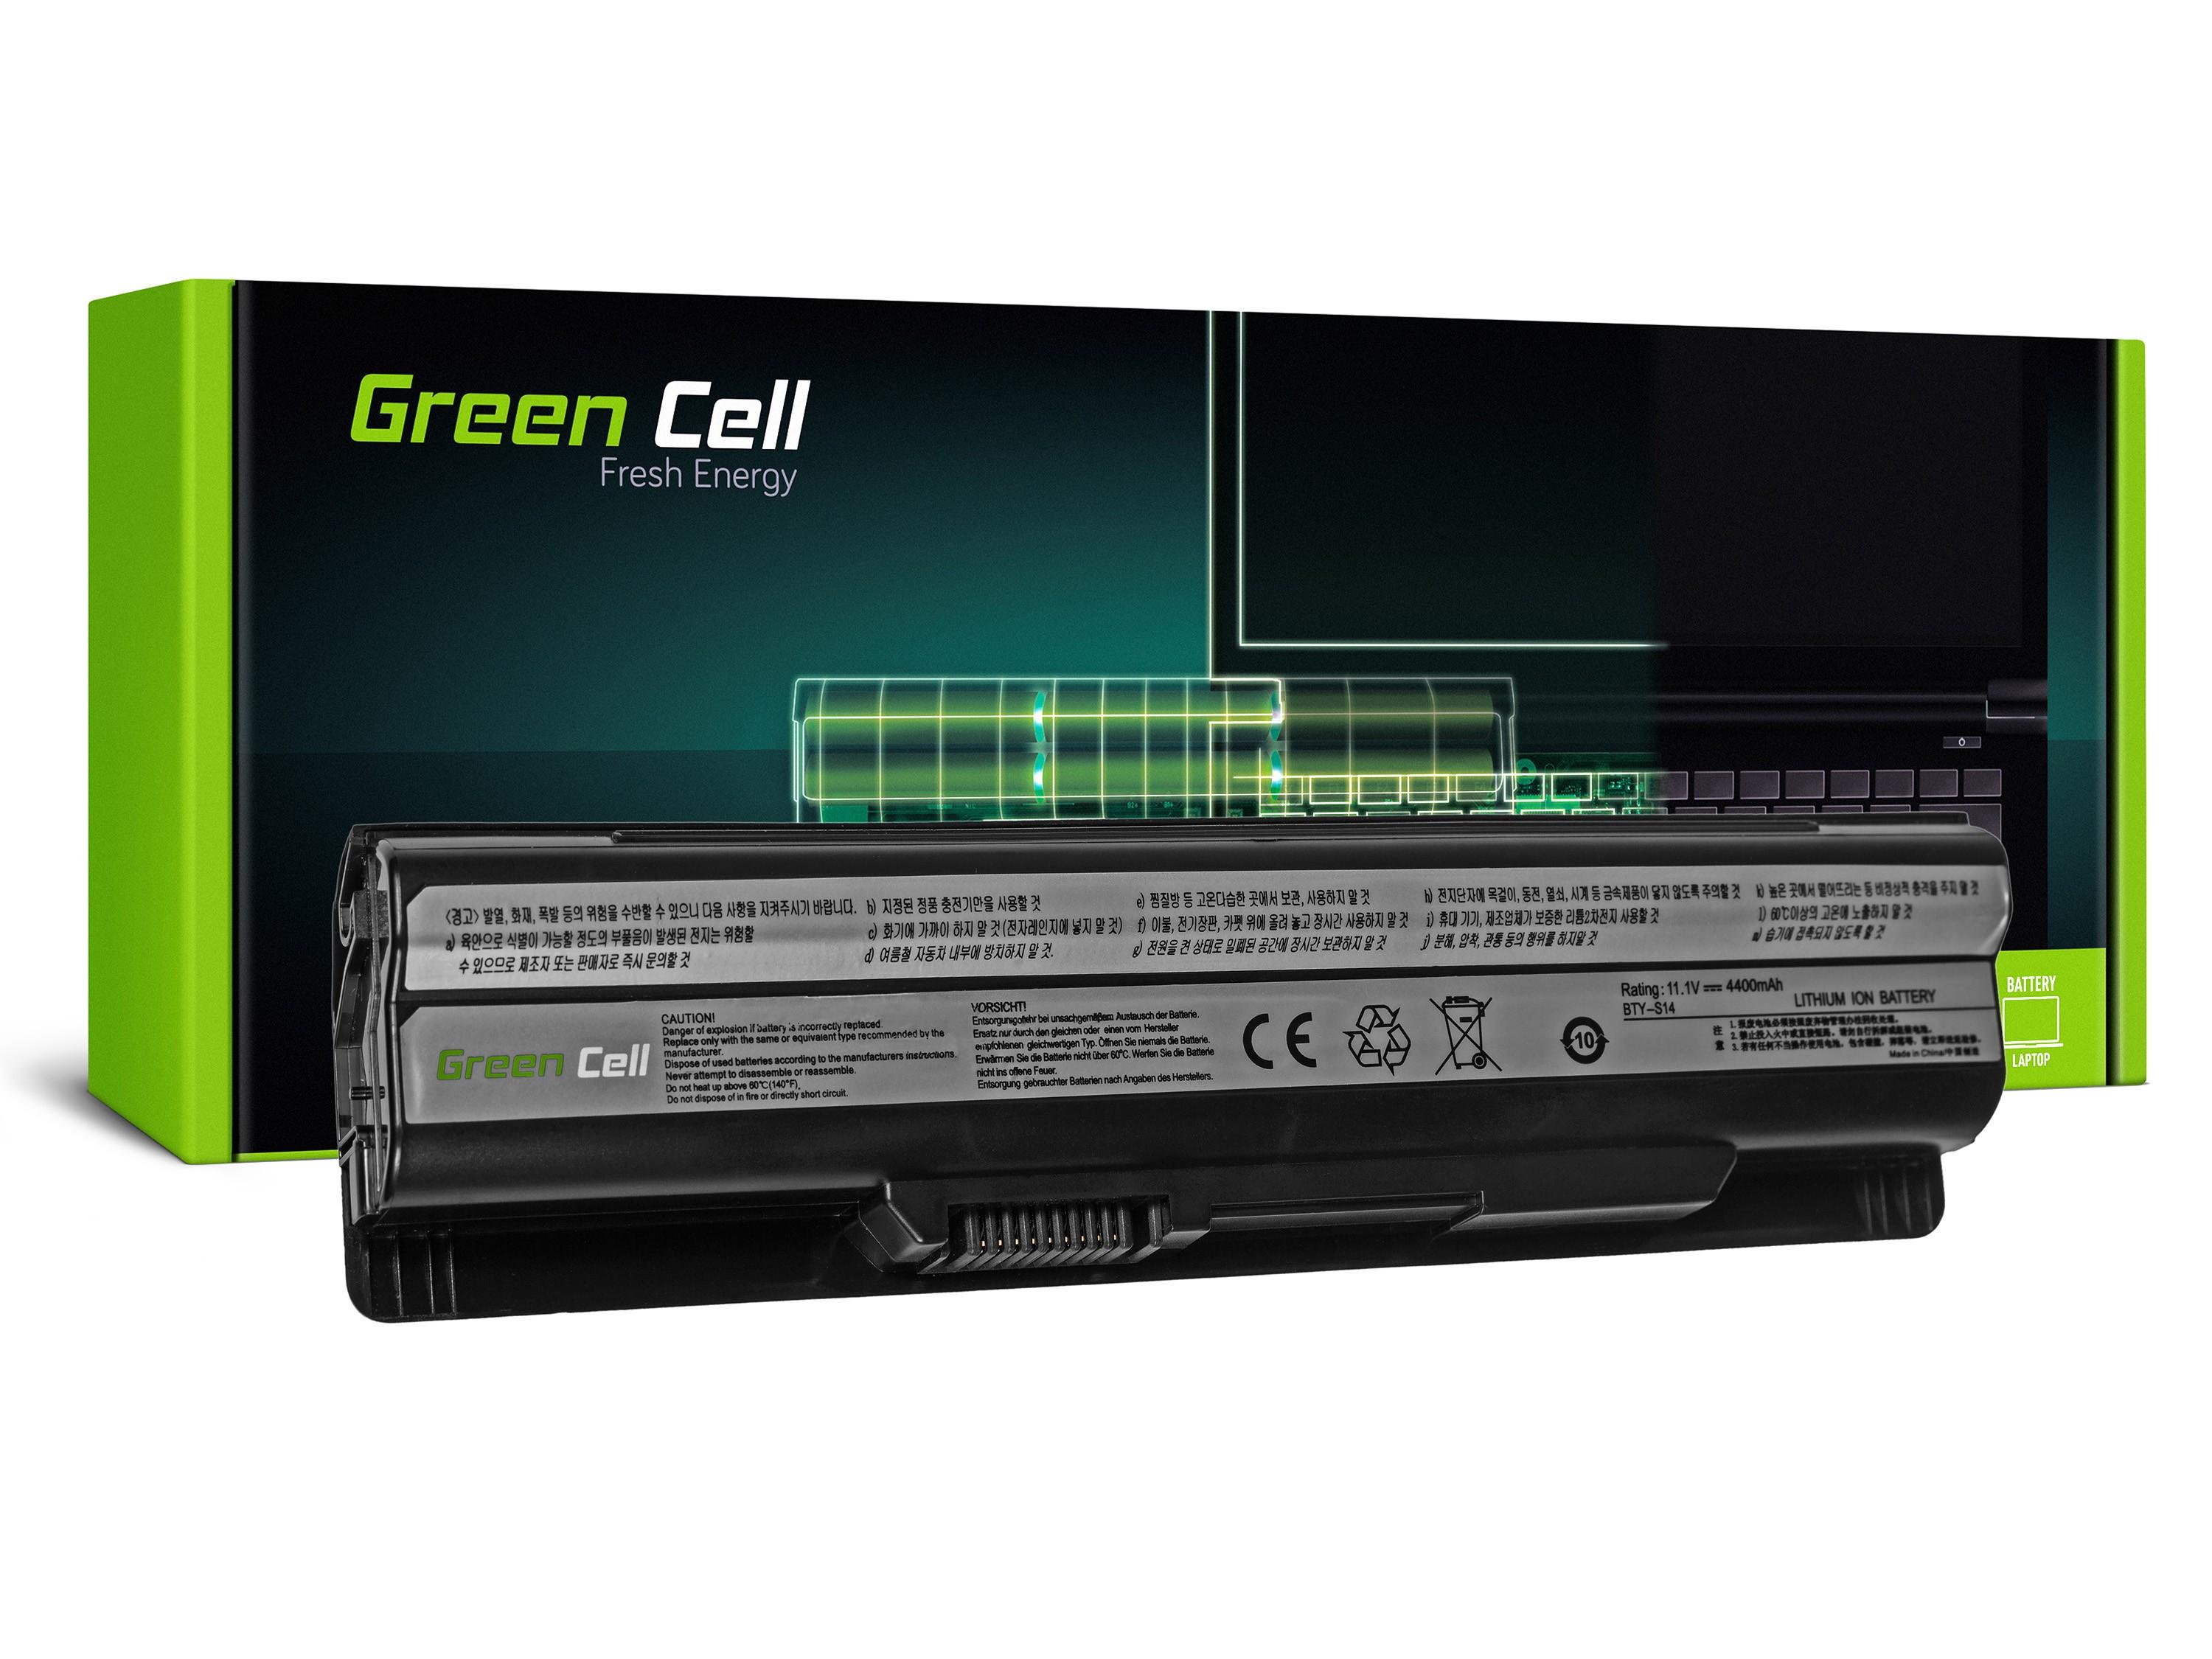 Green Cell Baterie BTY-S14 BTY-S15 pro MSI CR650 CX650 FX400 FX600 FX700 GE60 GE70 GP60 GP70 GE620 MS05